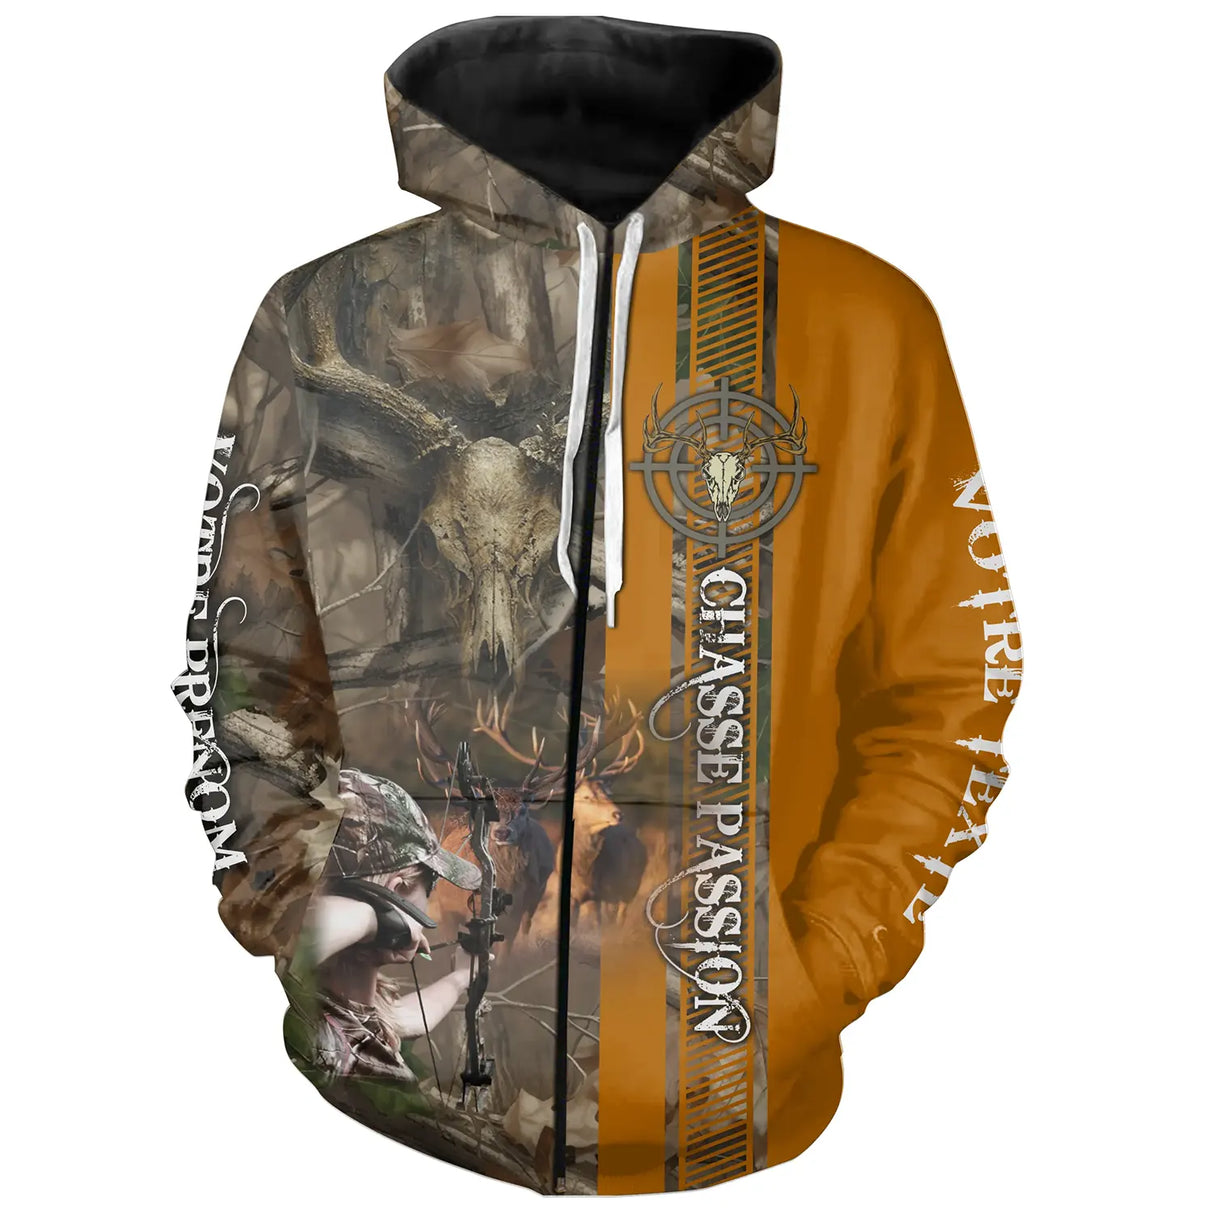 T-shirt, Sweat Chasse Au Cerf, Cadeau Personnaliser Chasseur, Camouflage Chasse Passion - CT08112229 Sweat Zippé All Over Unisexe